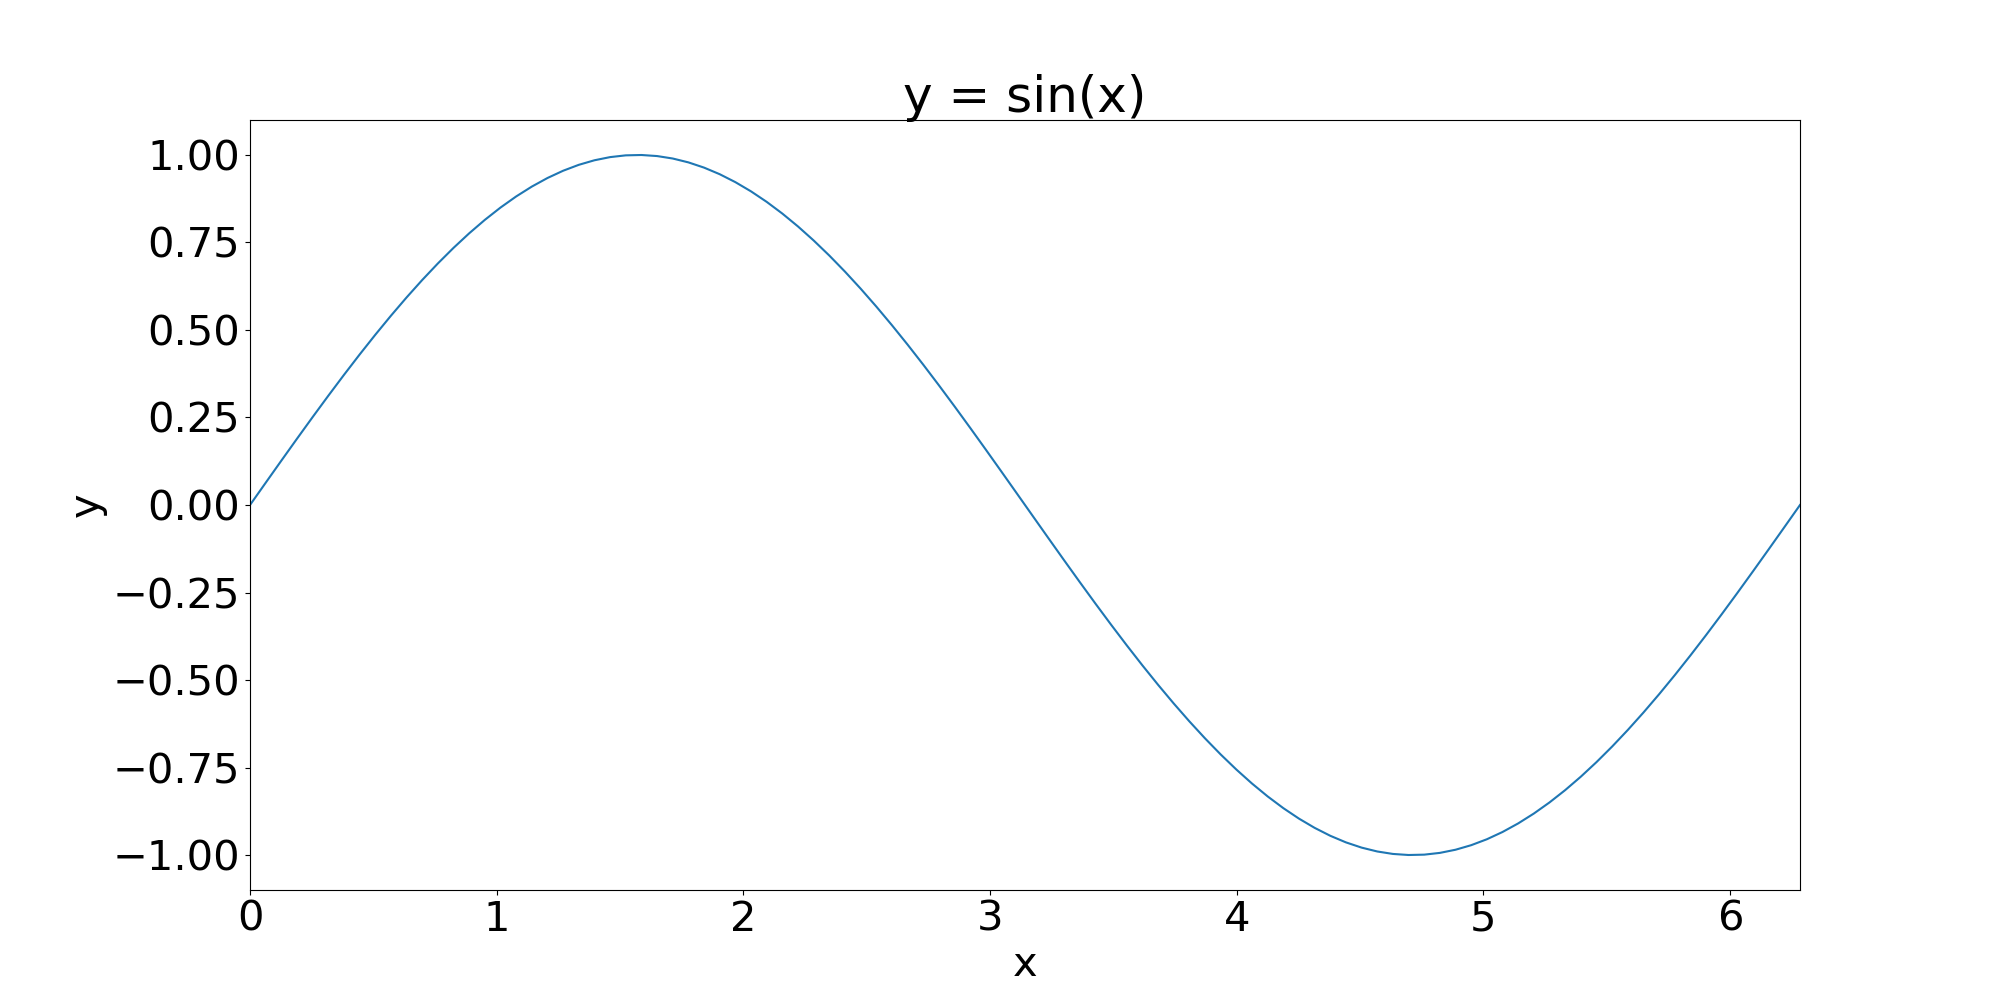 A plot of y=sin(x) for x between 0 and 2*pi, with axis labels, a title, and adjusted x limits.